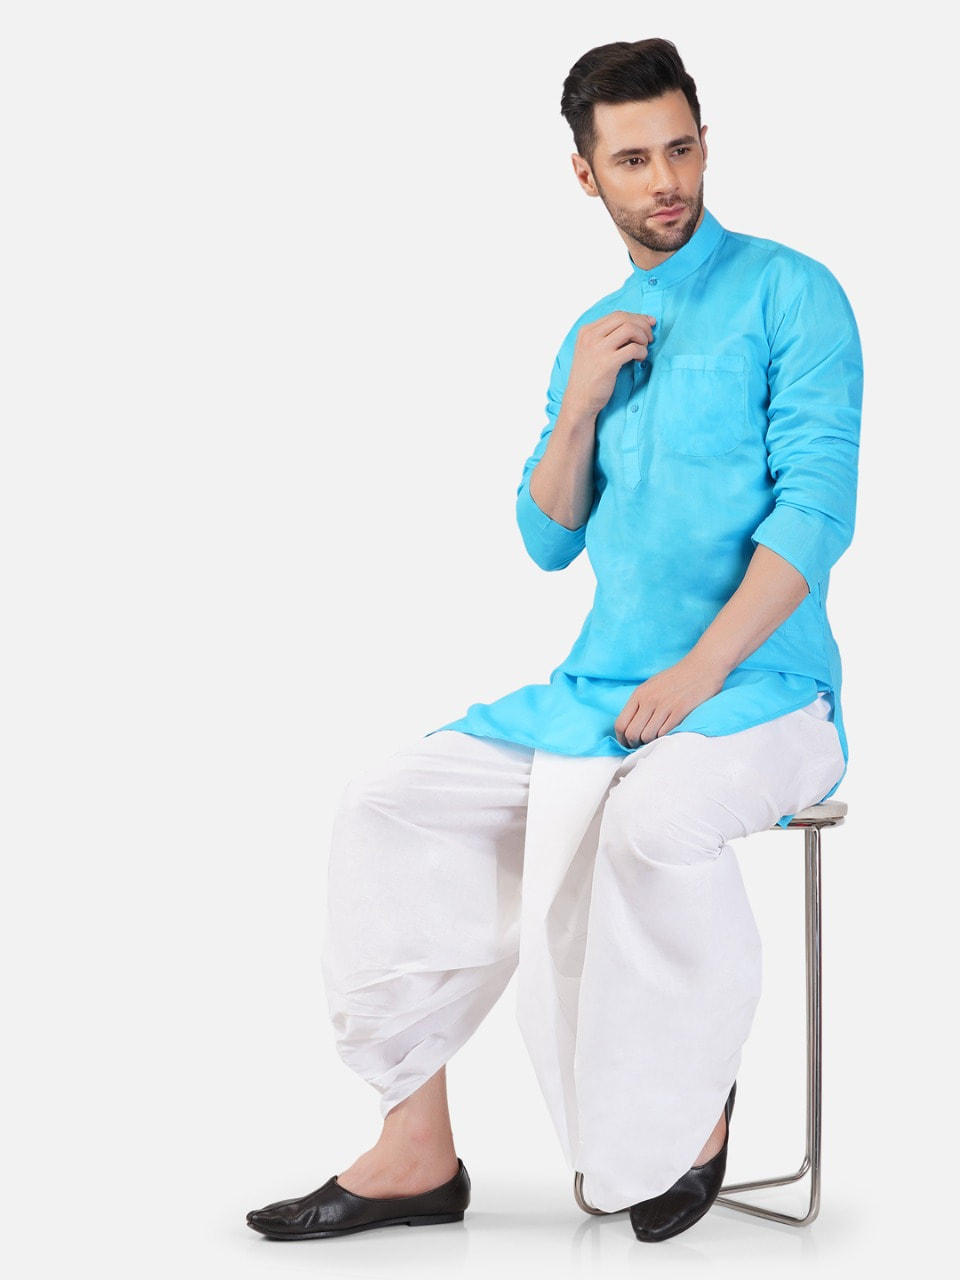 Men's Ethnic Indian Wear Photography